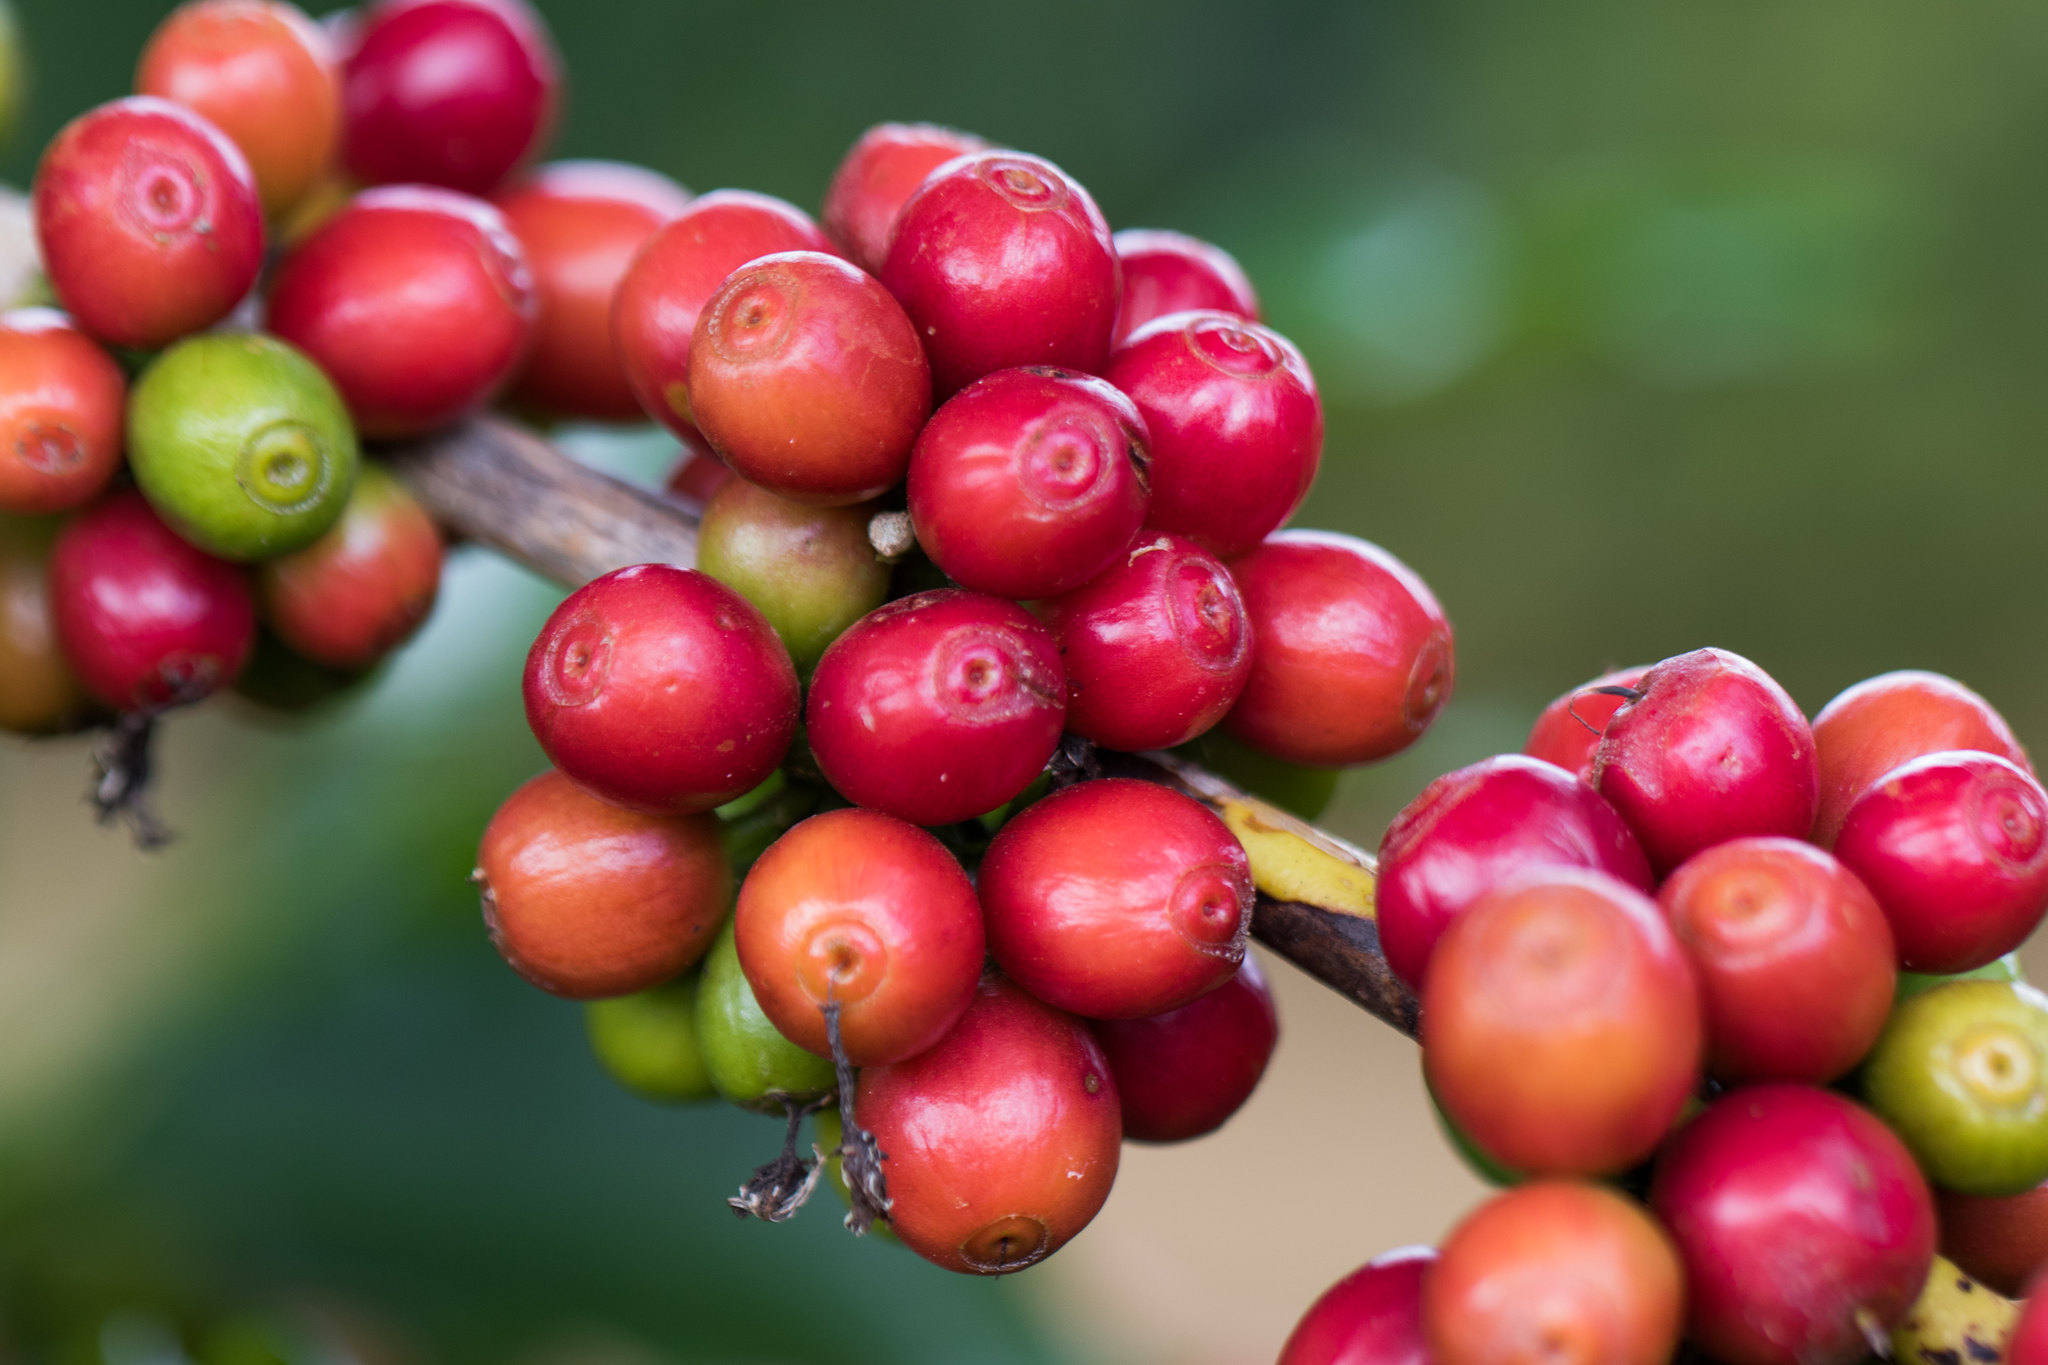 Brazilian Coffee Exports total 36,16 million bags in the last 12 months